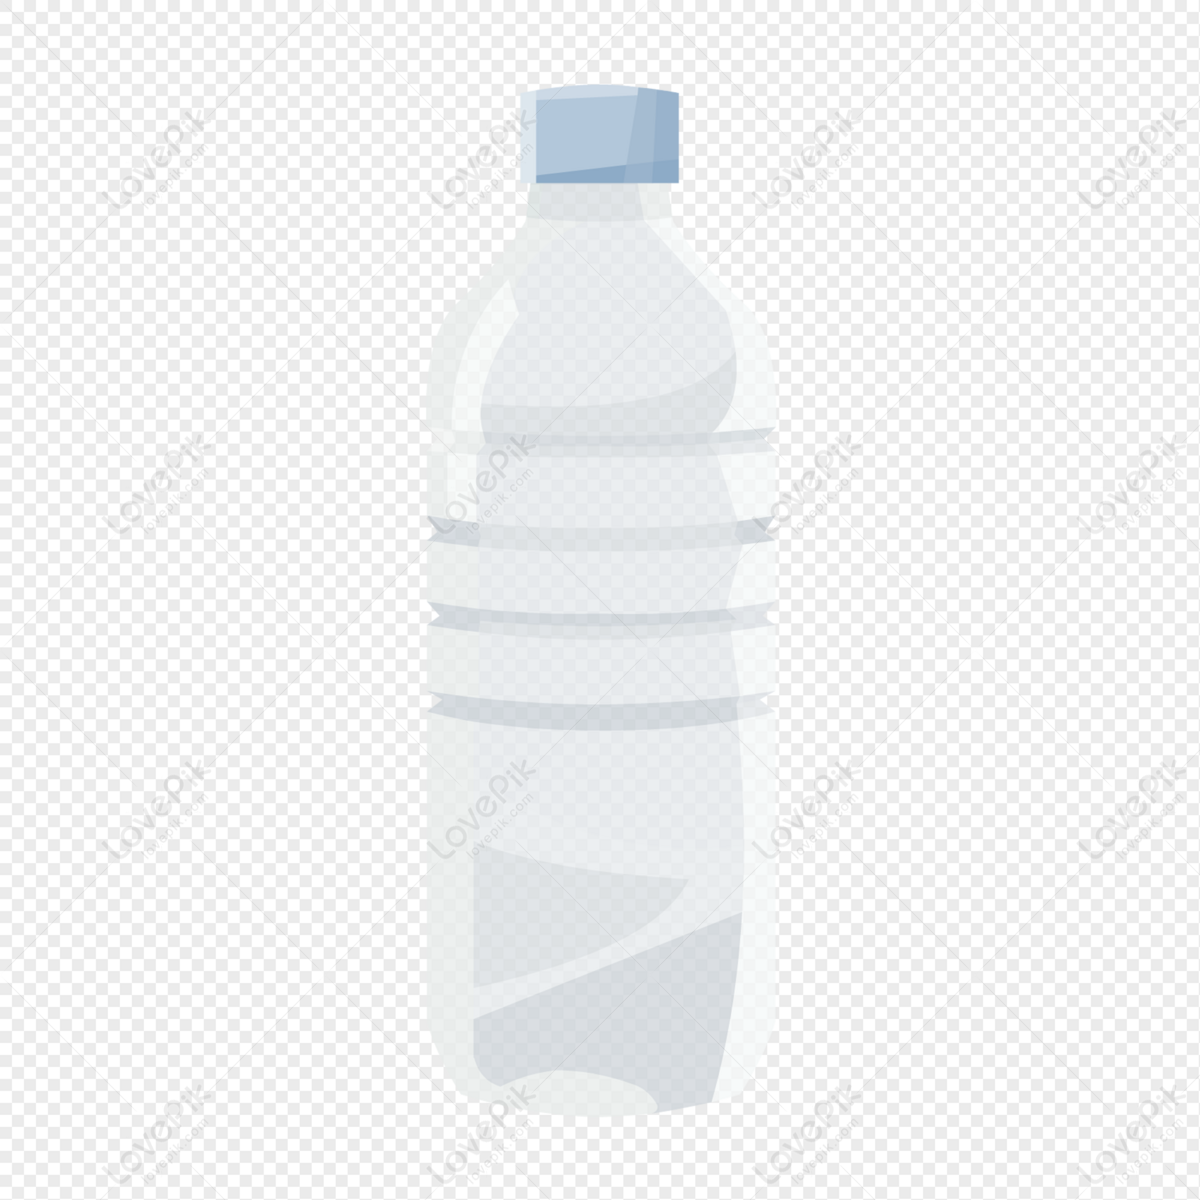 Mineral Water Bottles PNG Transparent And Clipart Image For Free Download -  Lovepik | 401552716